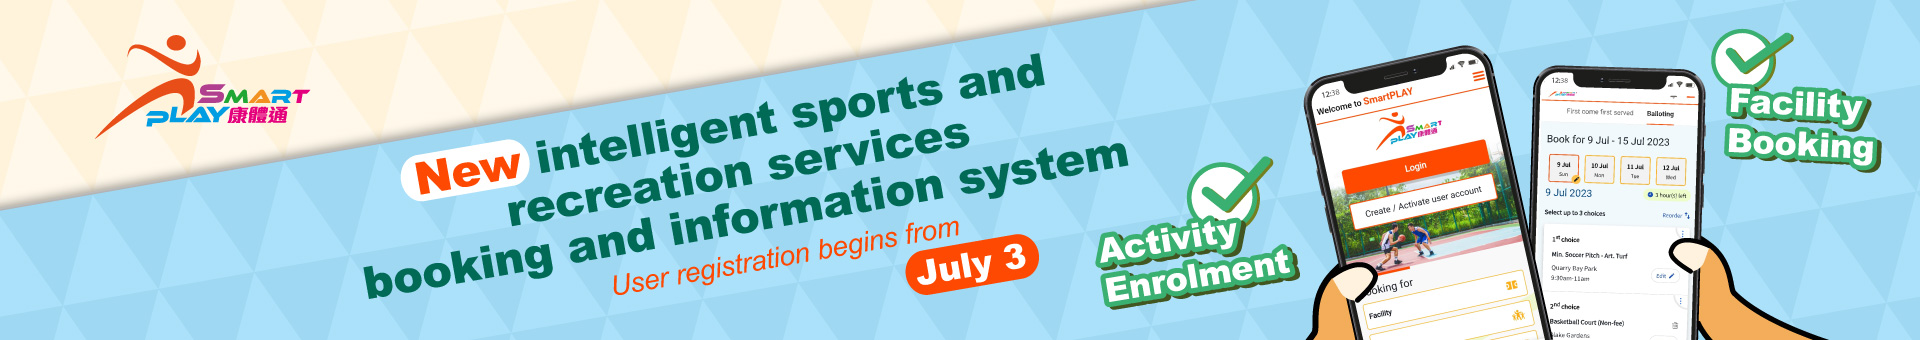 New intelligent sports and recreation services booking and information system